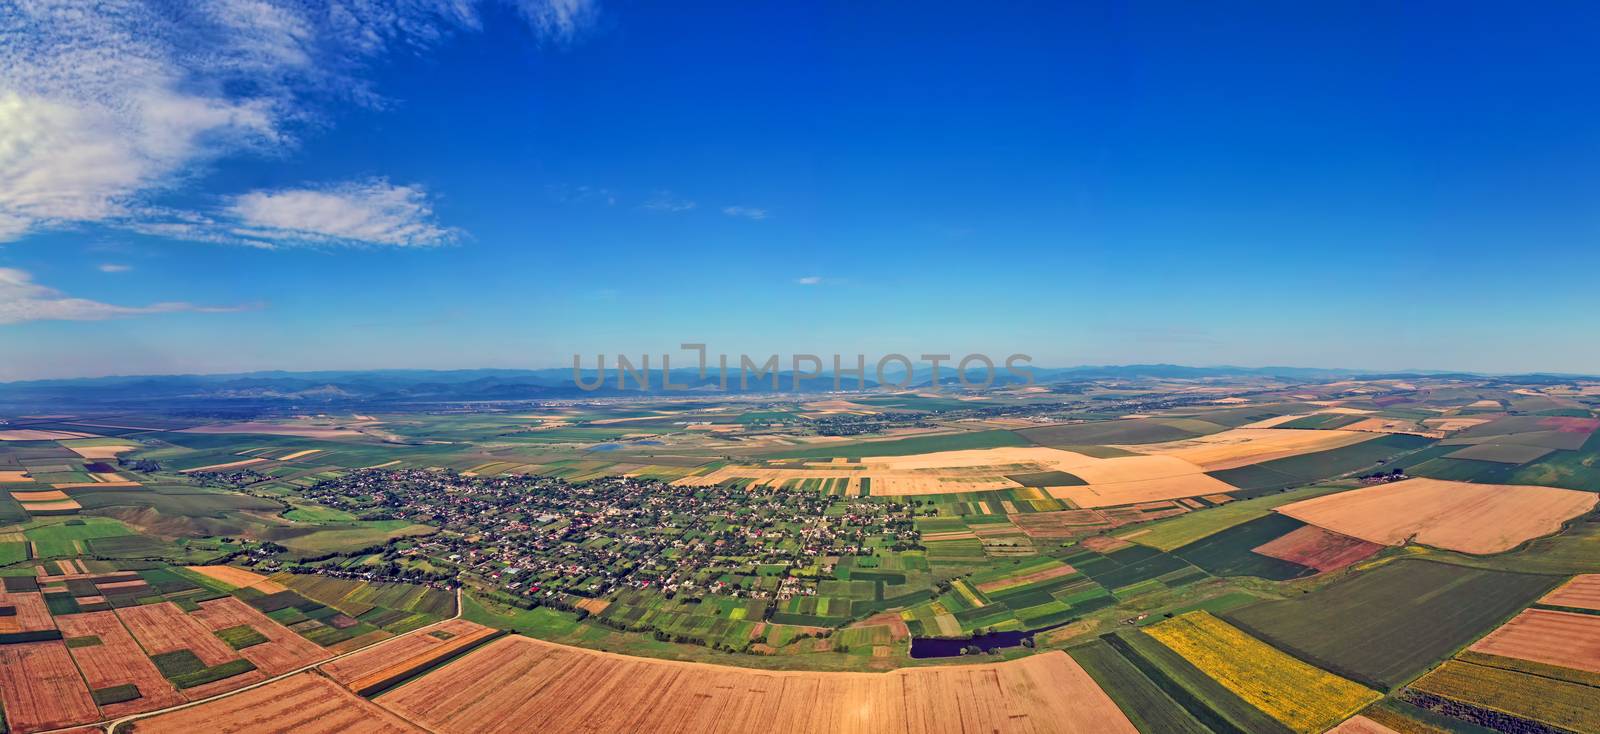 Summer panorama aerial view of village and culture fields